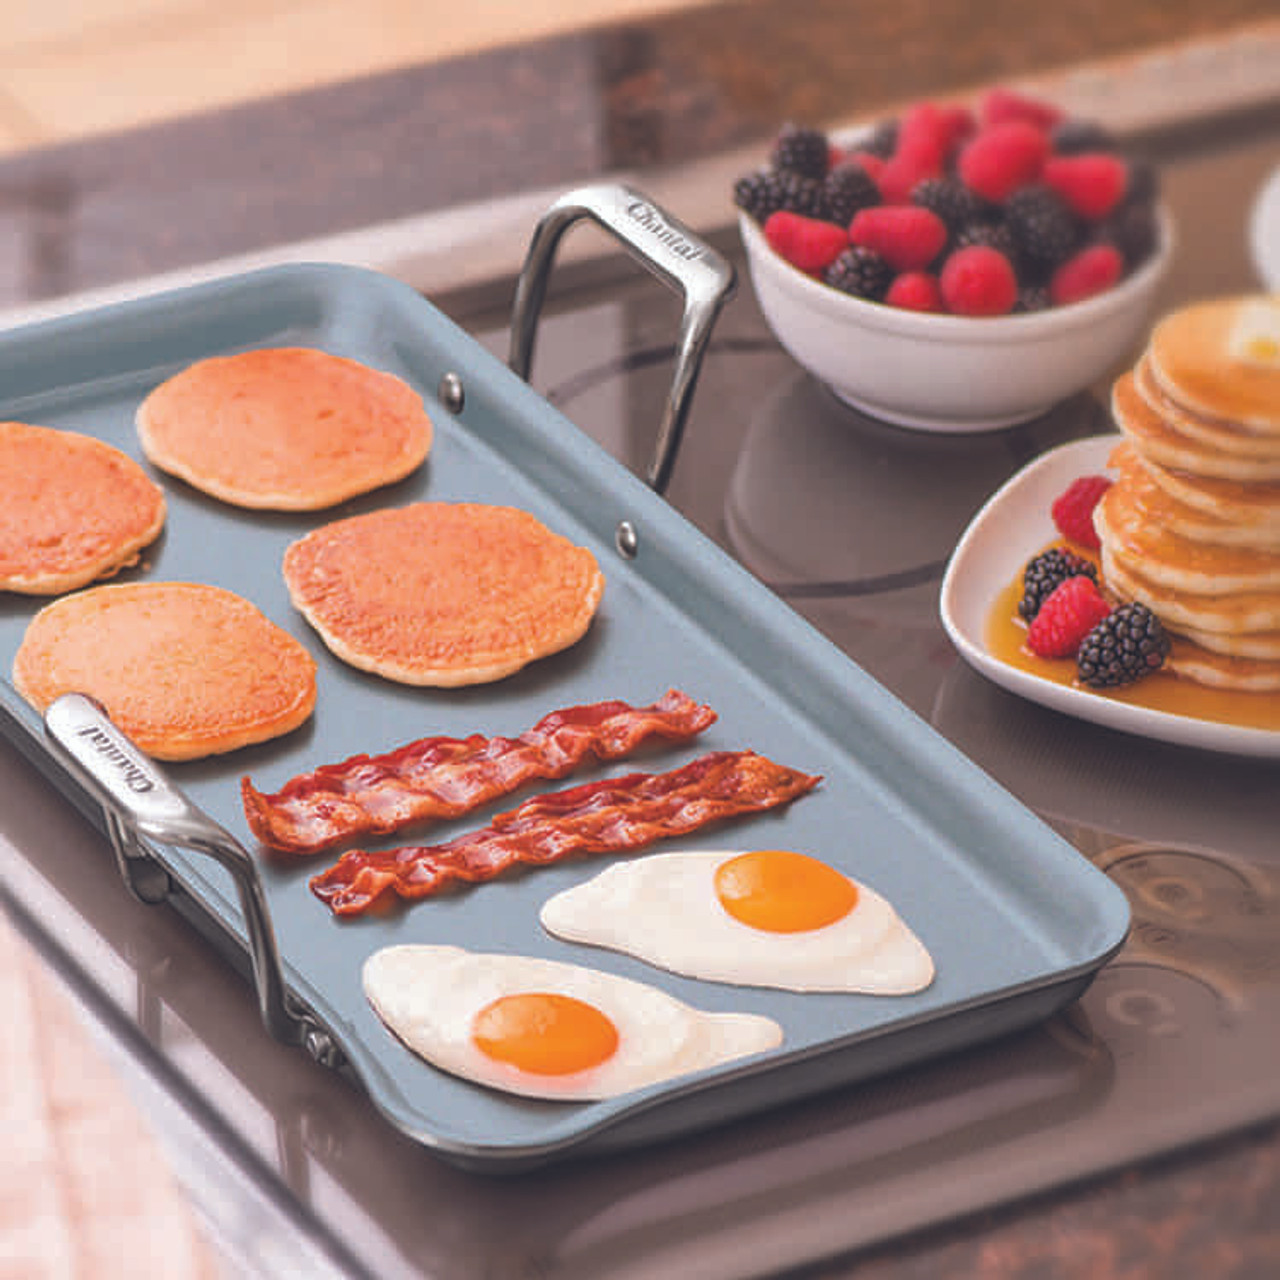 https://cdn11.bigcommerce.com/s-hccytny0od/images/stencil/1280x1280/products/2679/9396/chantal-induction-21-steel-ceramic-coated-griddle-2__81314.1564488219.jpg?c=2?imbypass=on